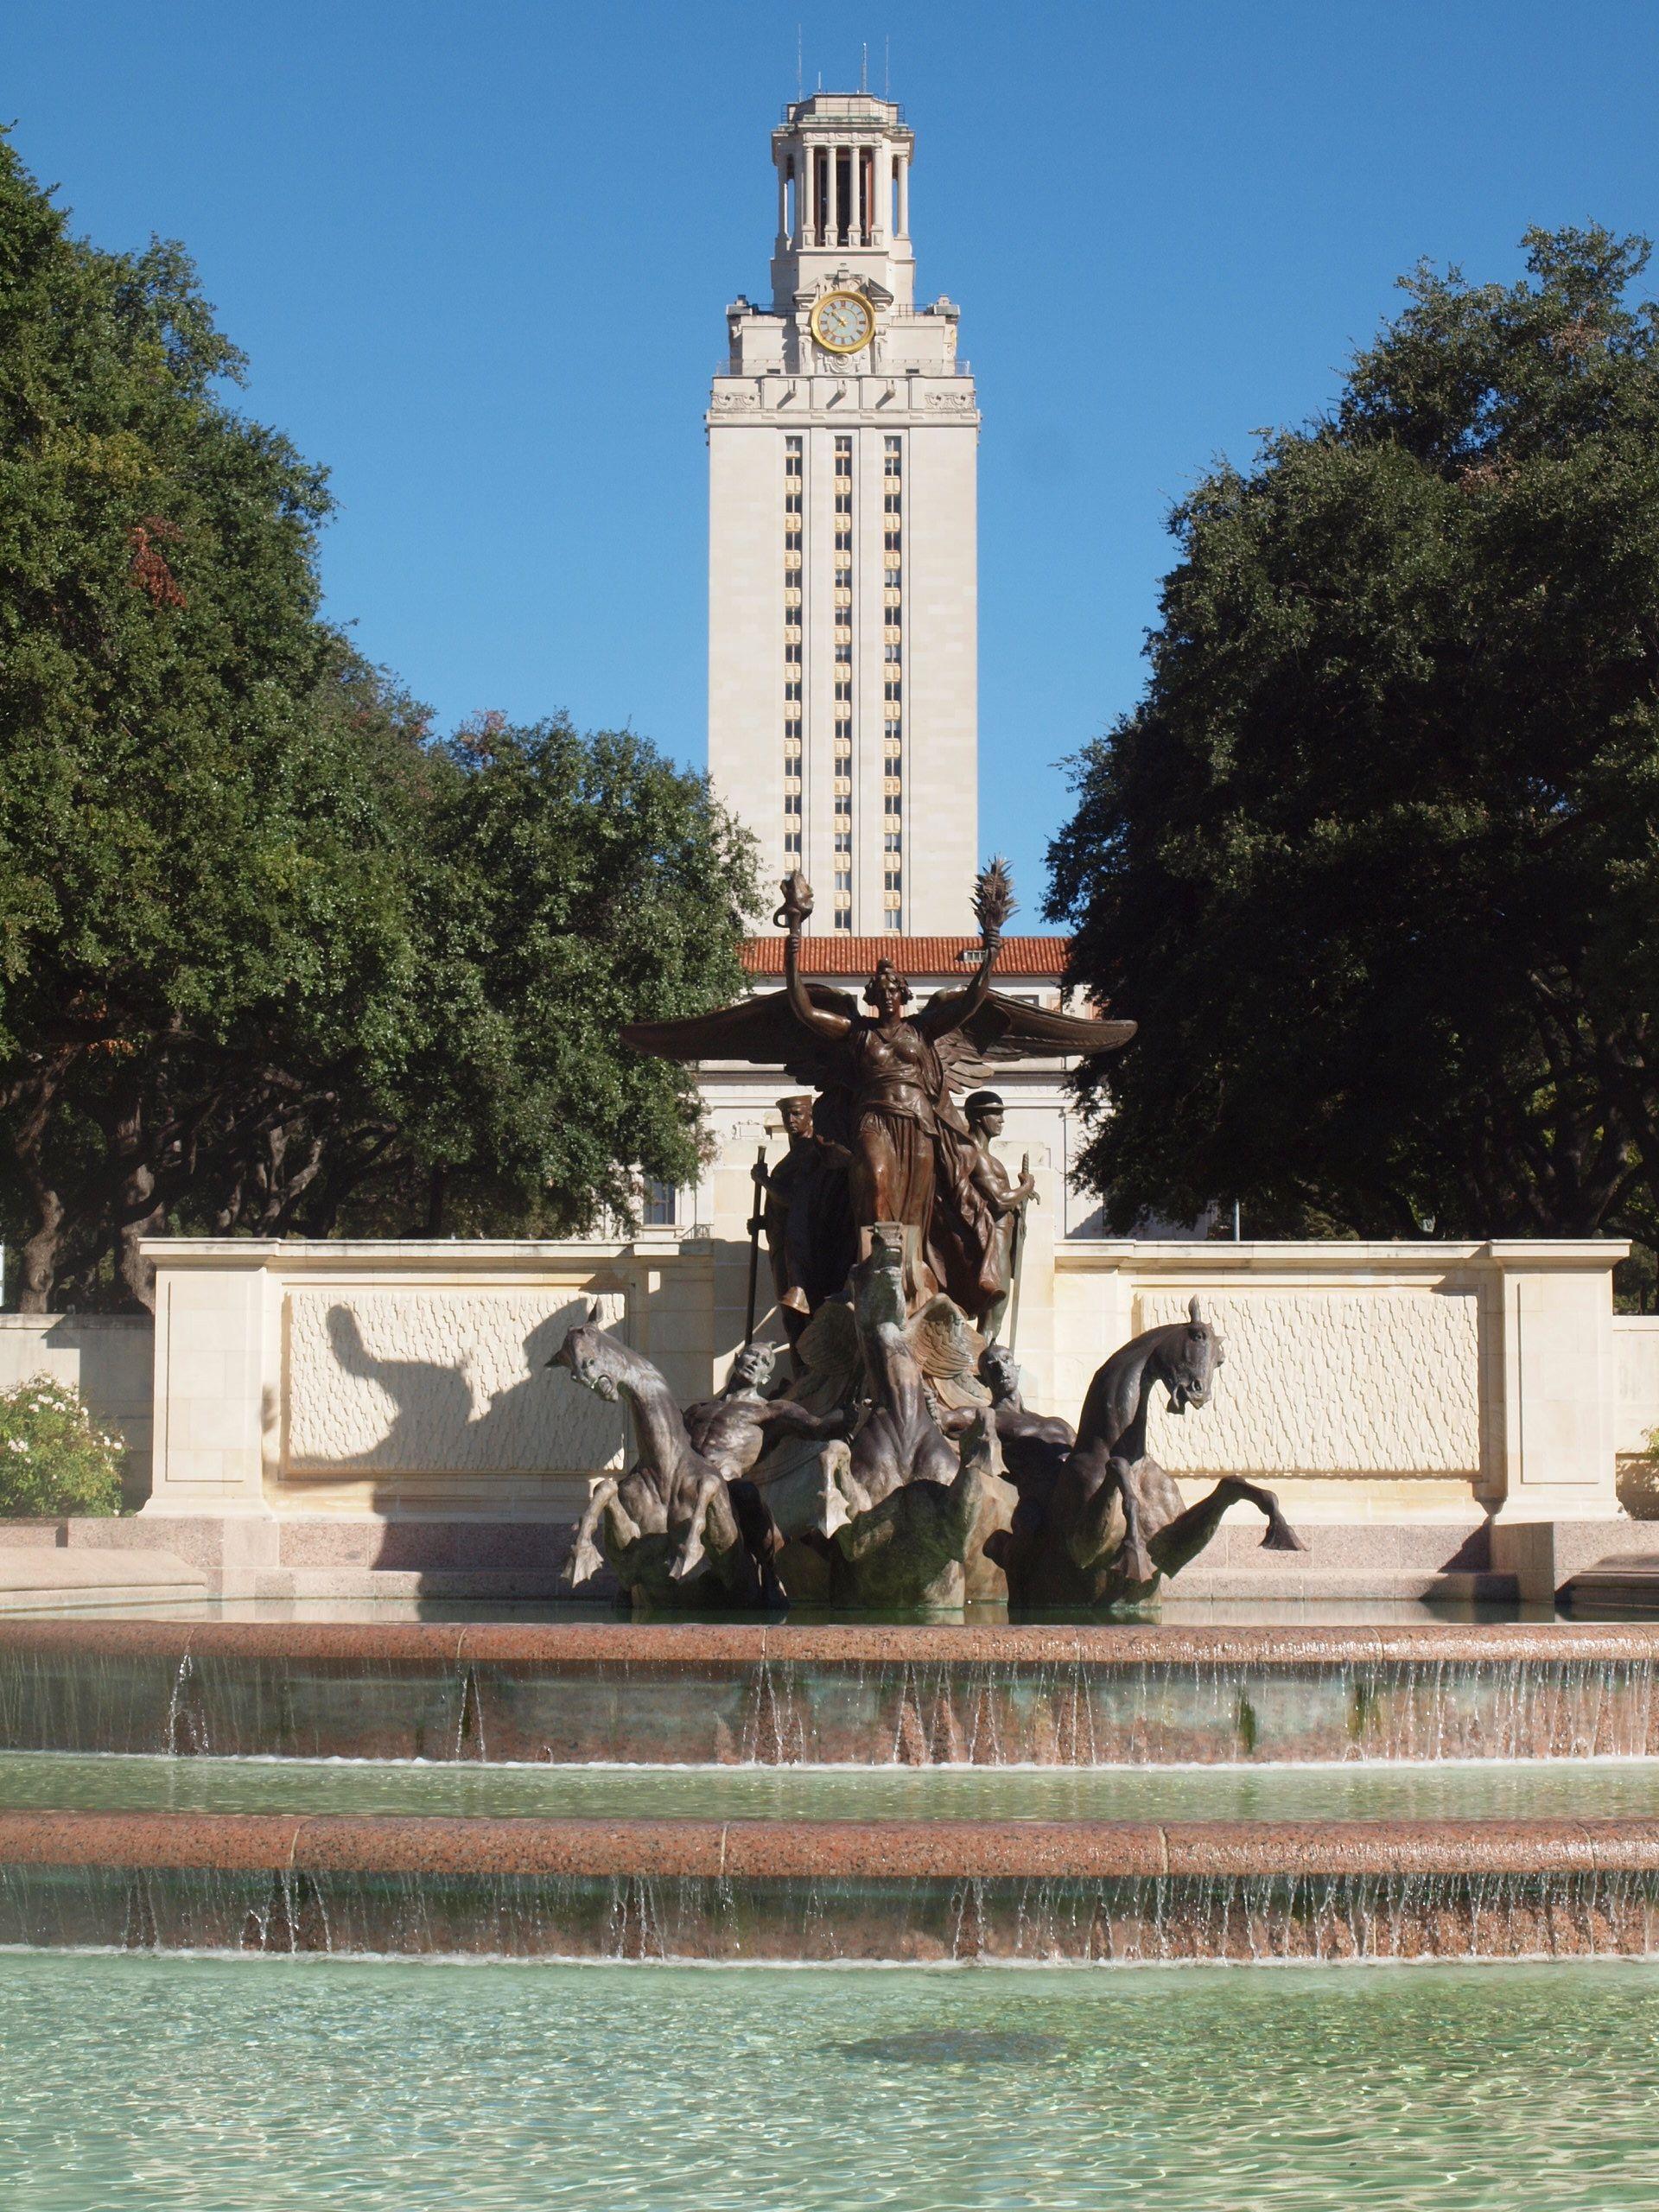 University of Texas Austin. Download HD Background